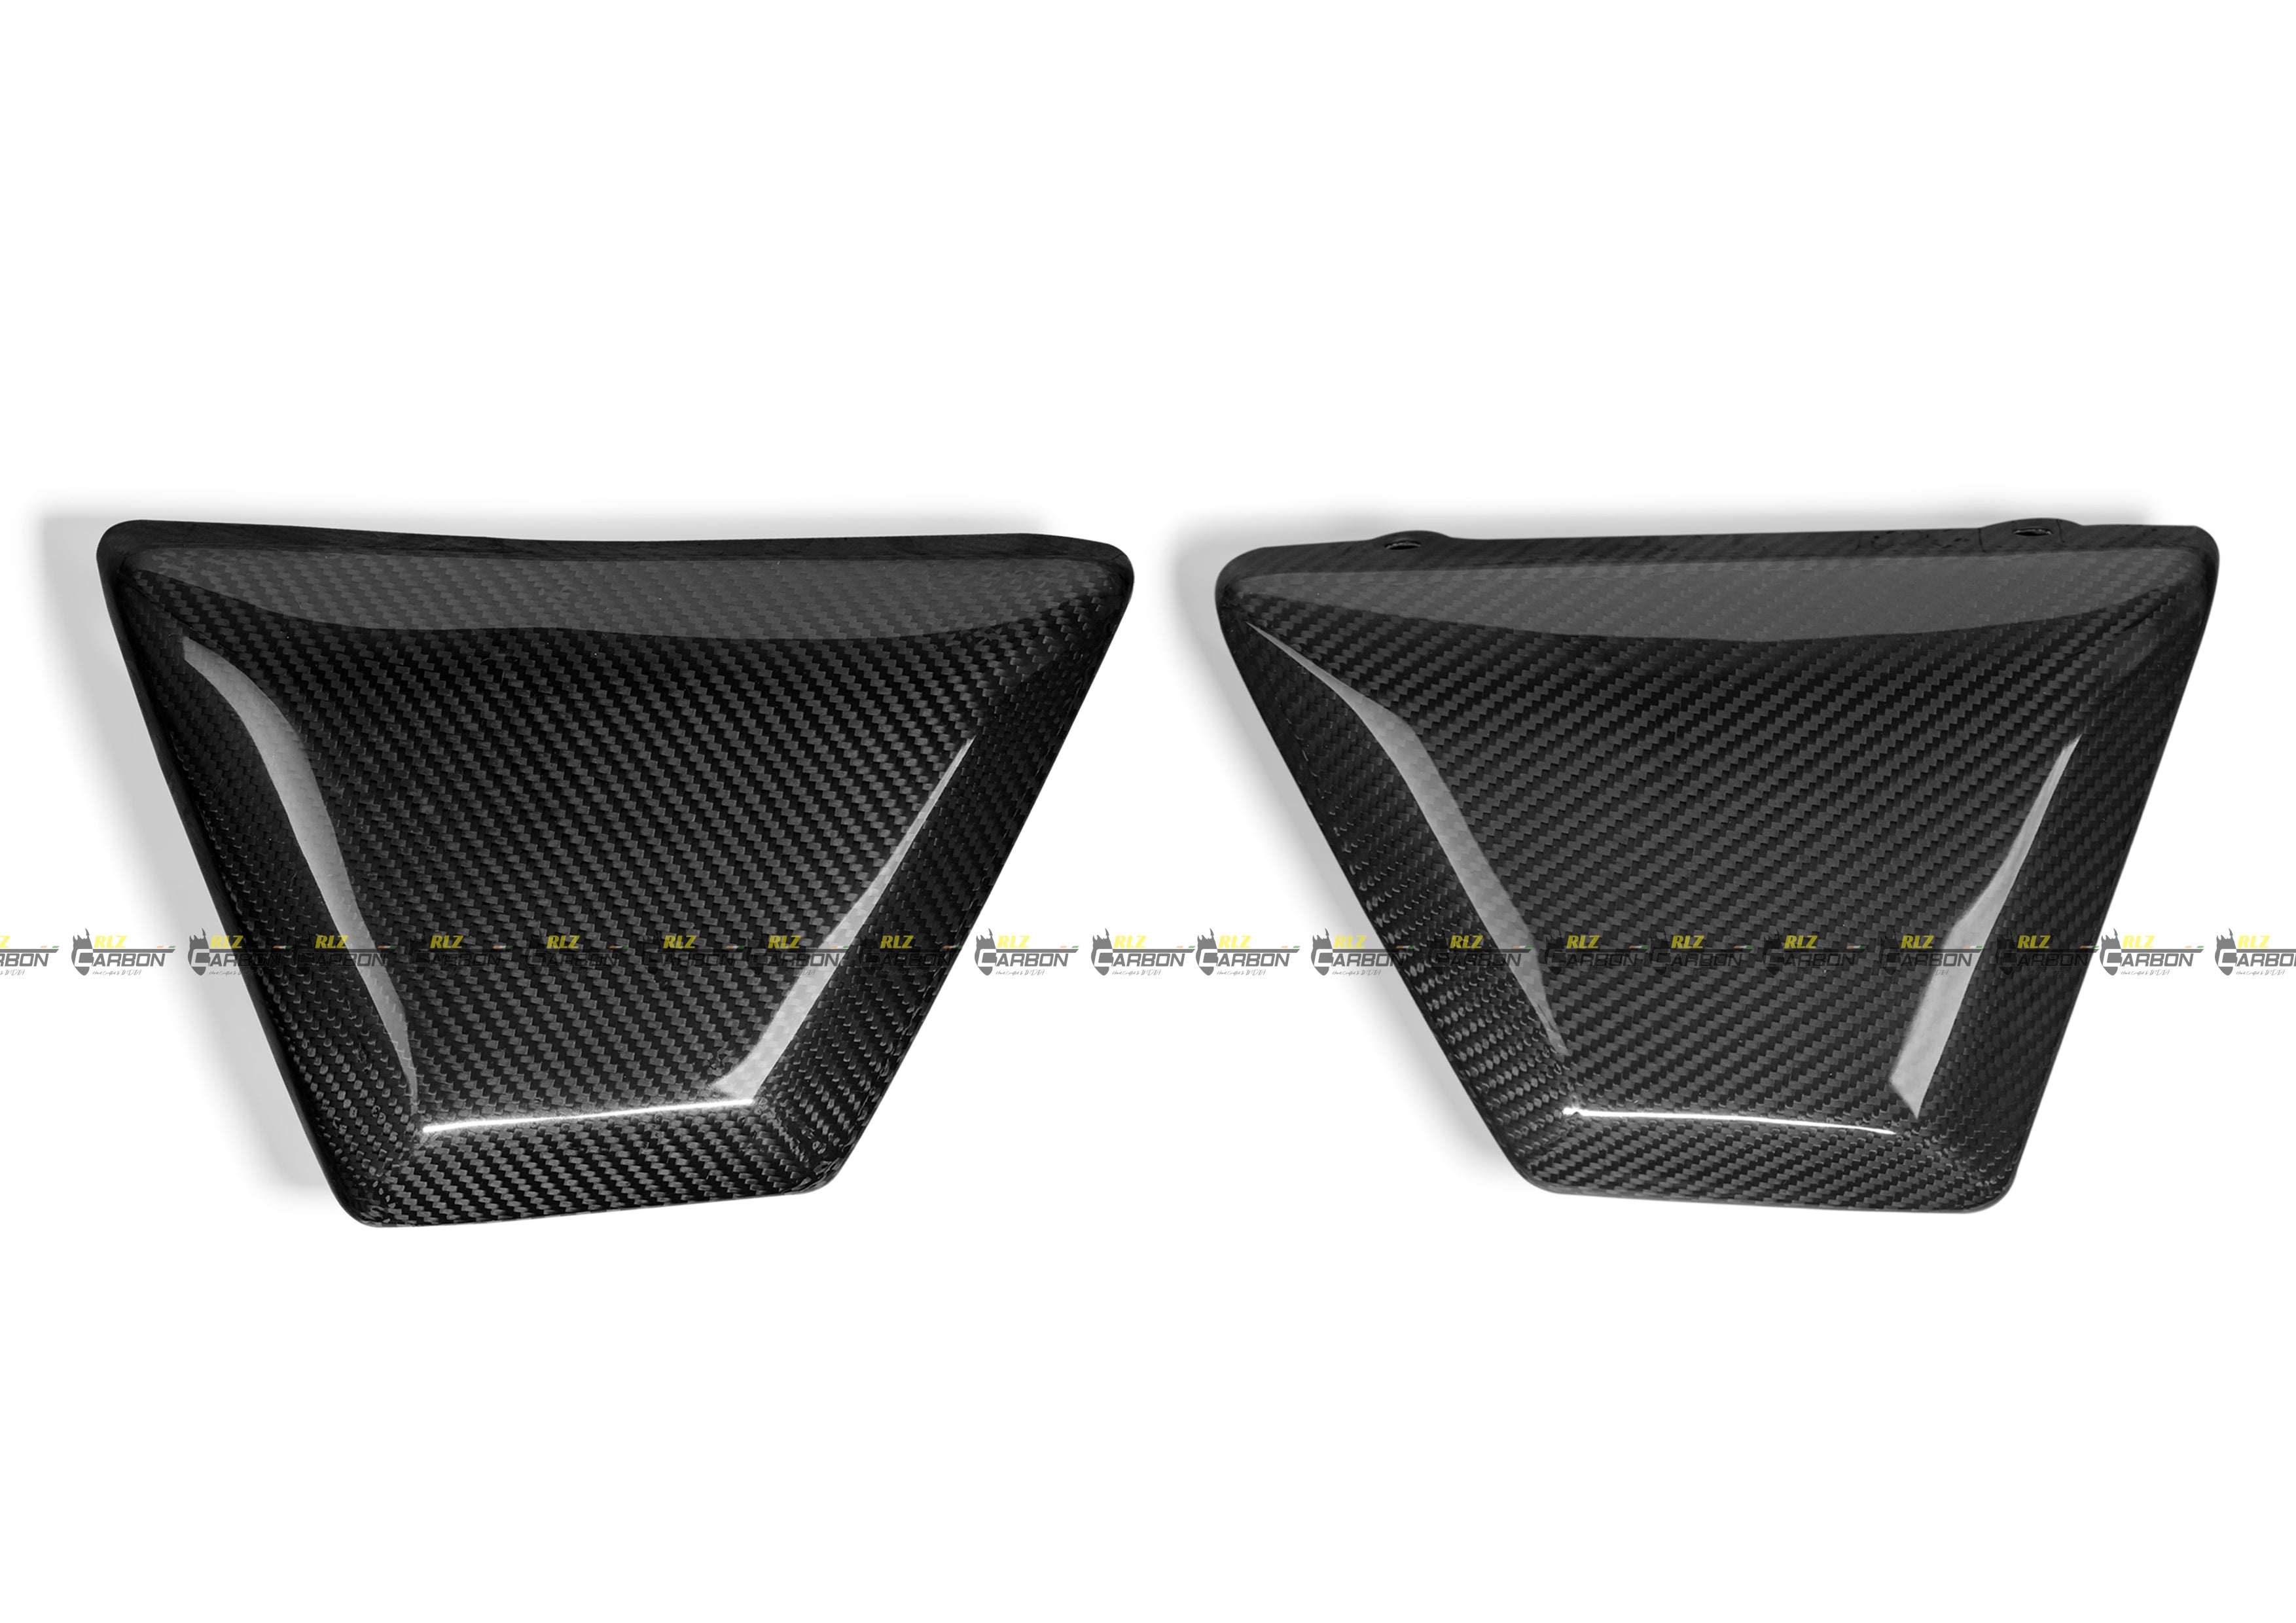 Carbon Fiber Side Panel Covers for Royal Enfield Continental GT 650